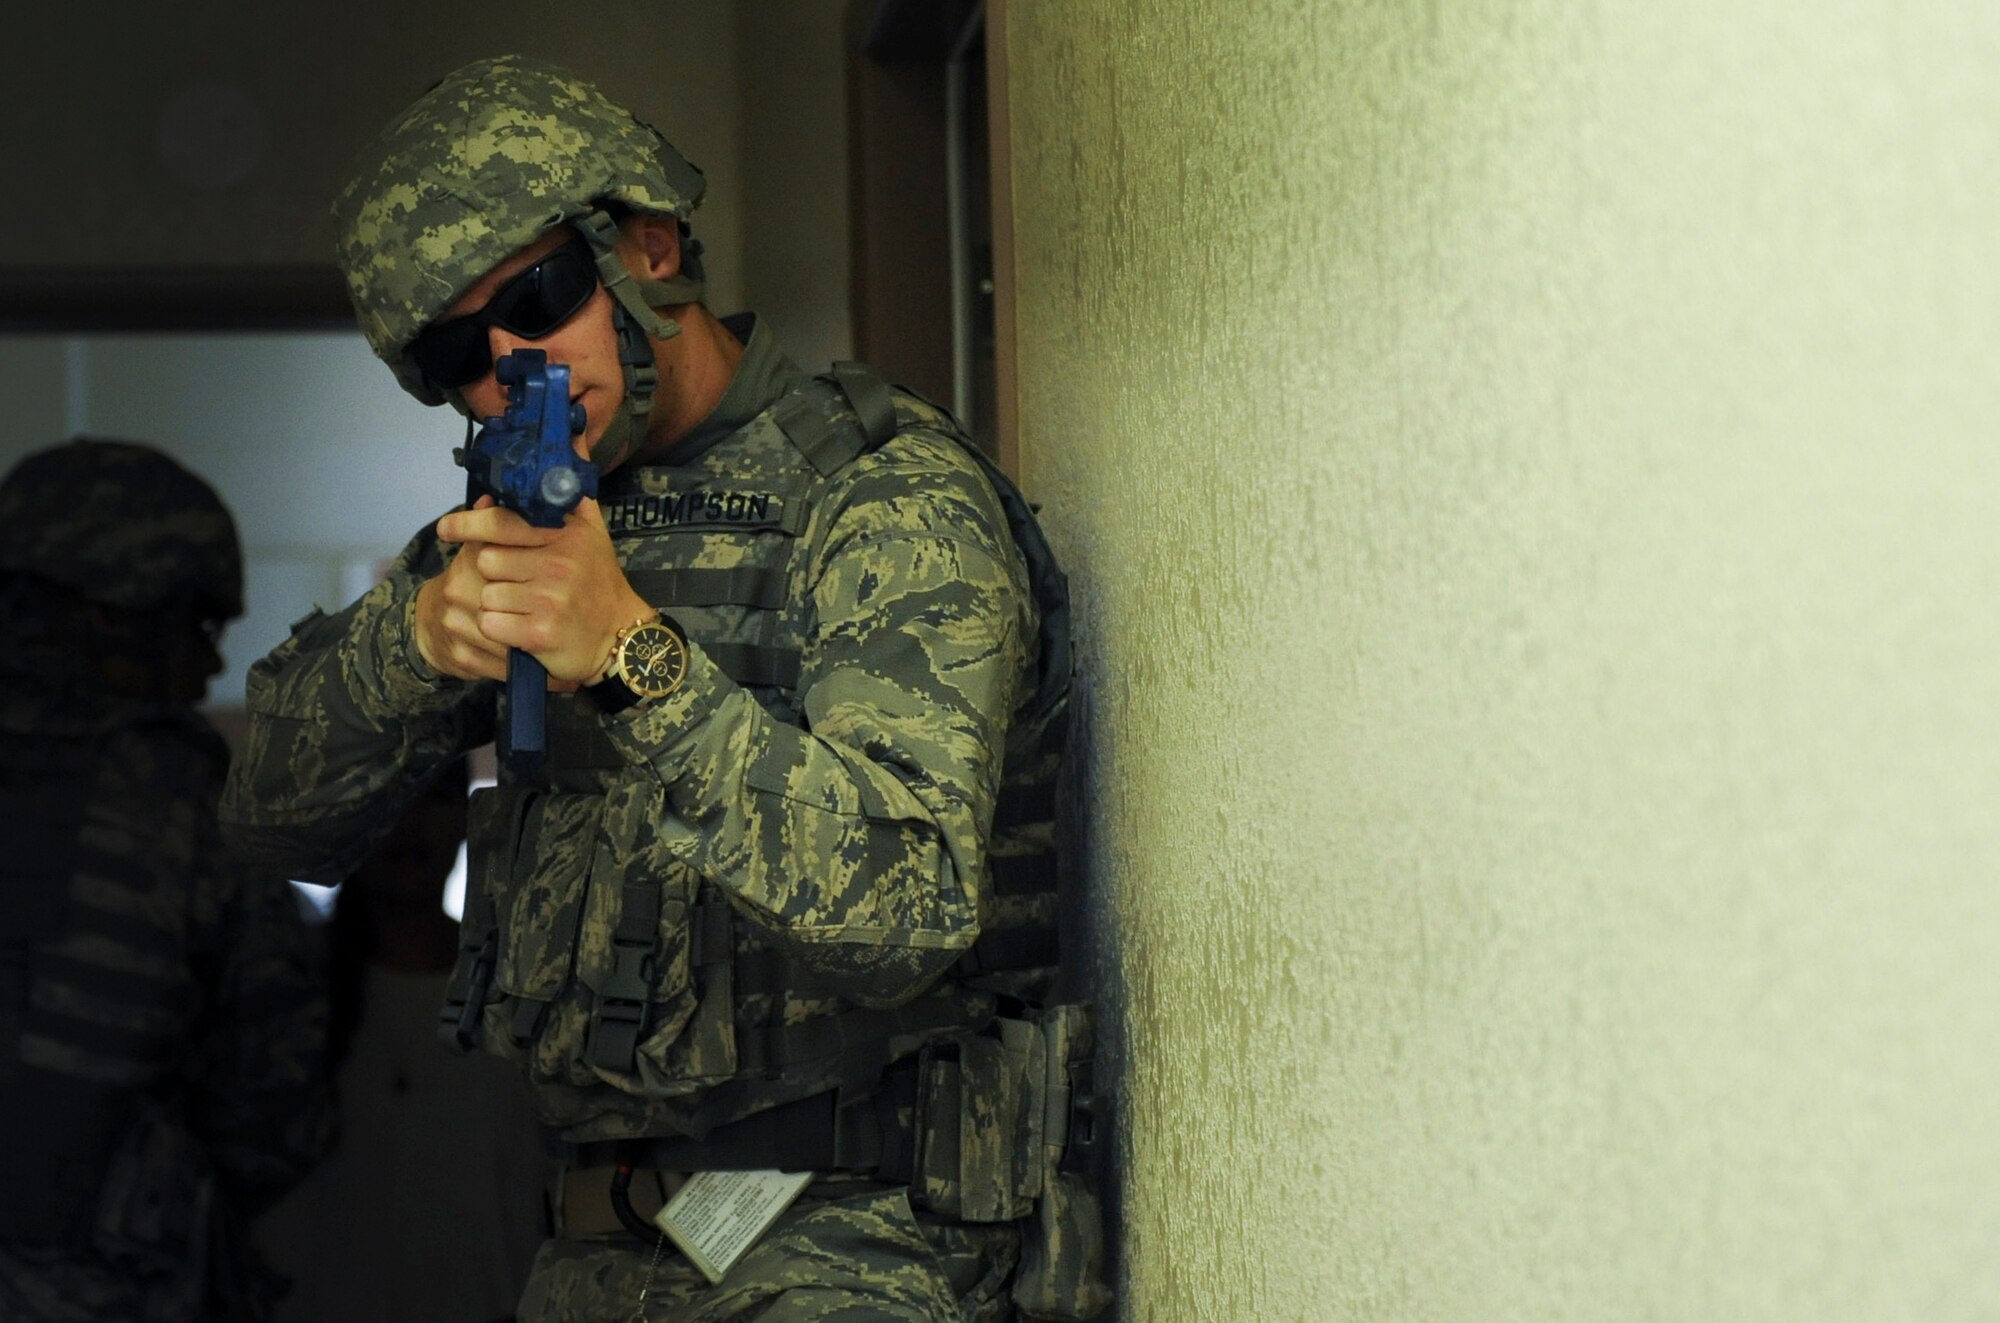 Airman 1st Class Nicolus Thompson, 99th Security Forces Squadron member, covers the front of a formation during a simulated active-shooter scenario in Area II on Nellis Air Force Base, Nev., May 17, 2017. The 99th SFS provides flight line security, police services, antiterrorism and force protection for Nellis and Creech AFBs. (U.S. Air Force photo by Senior Airman Kevin Tanenbaum/Released)